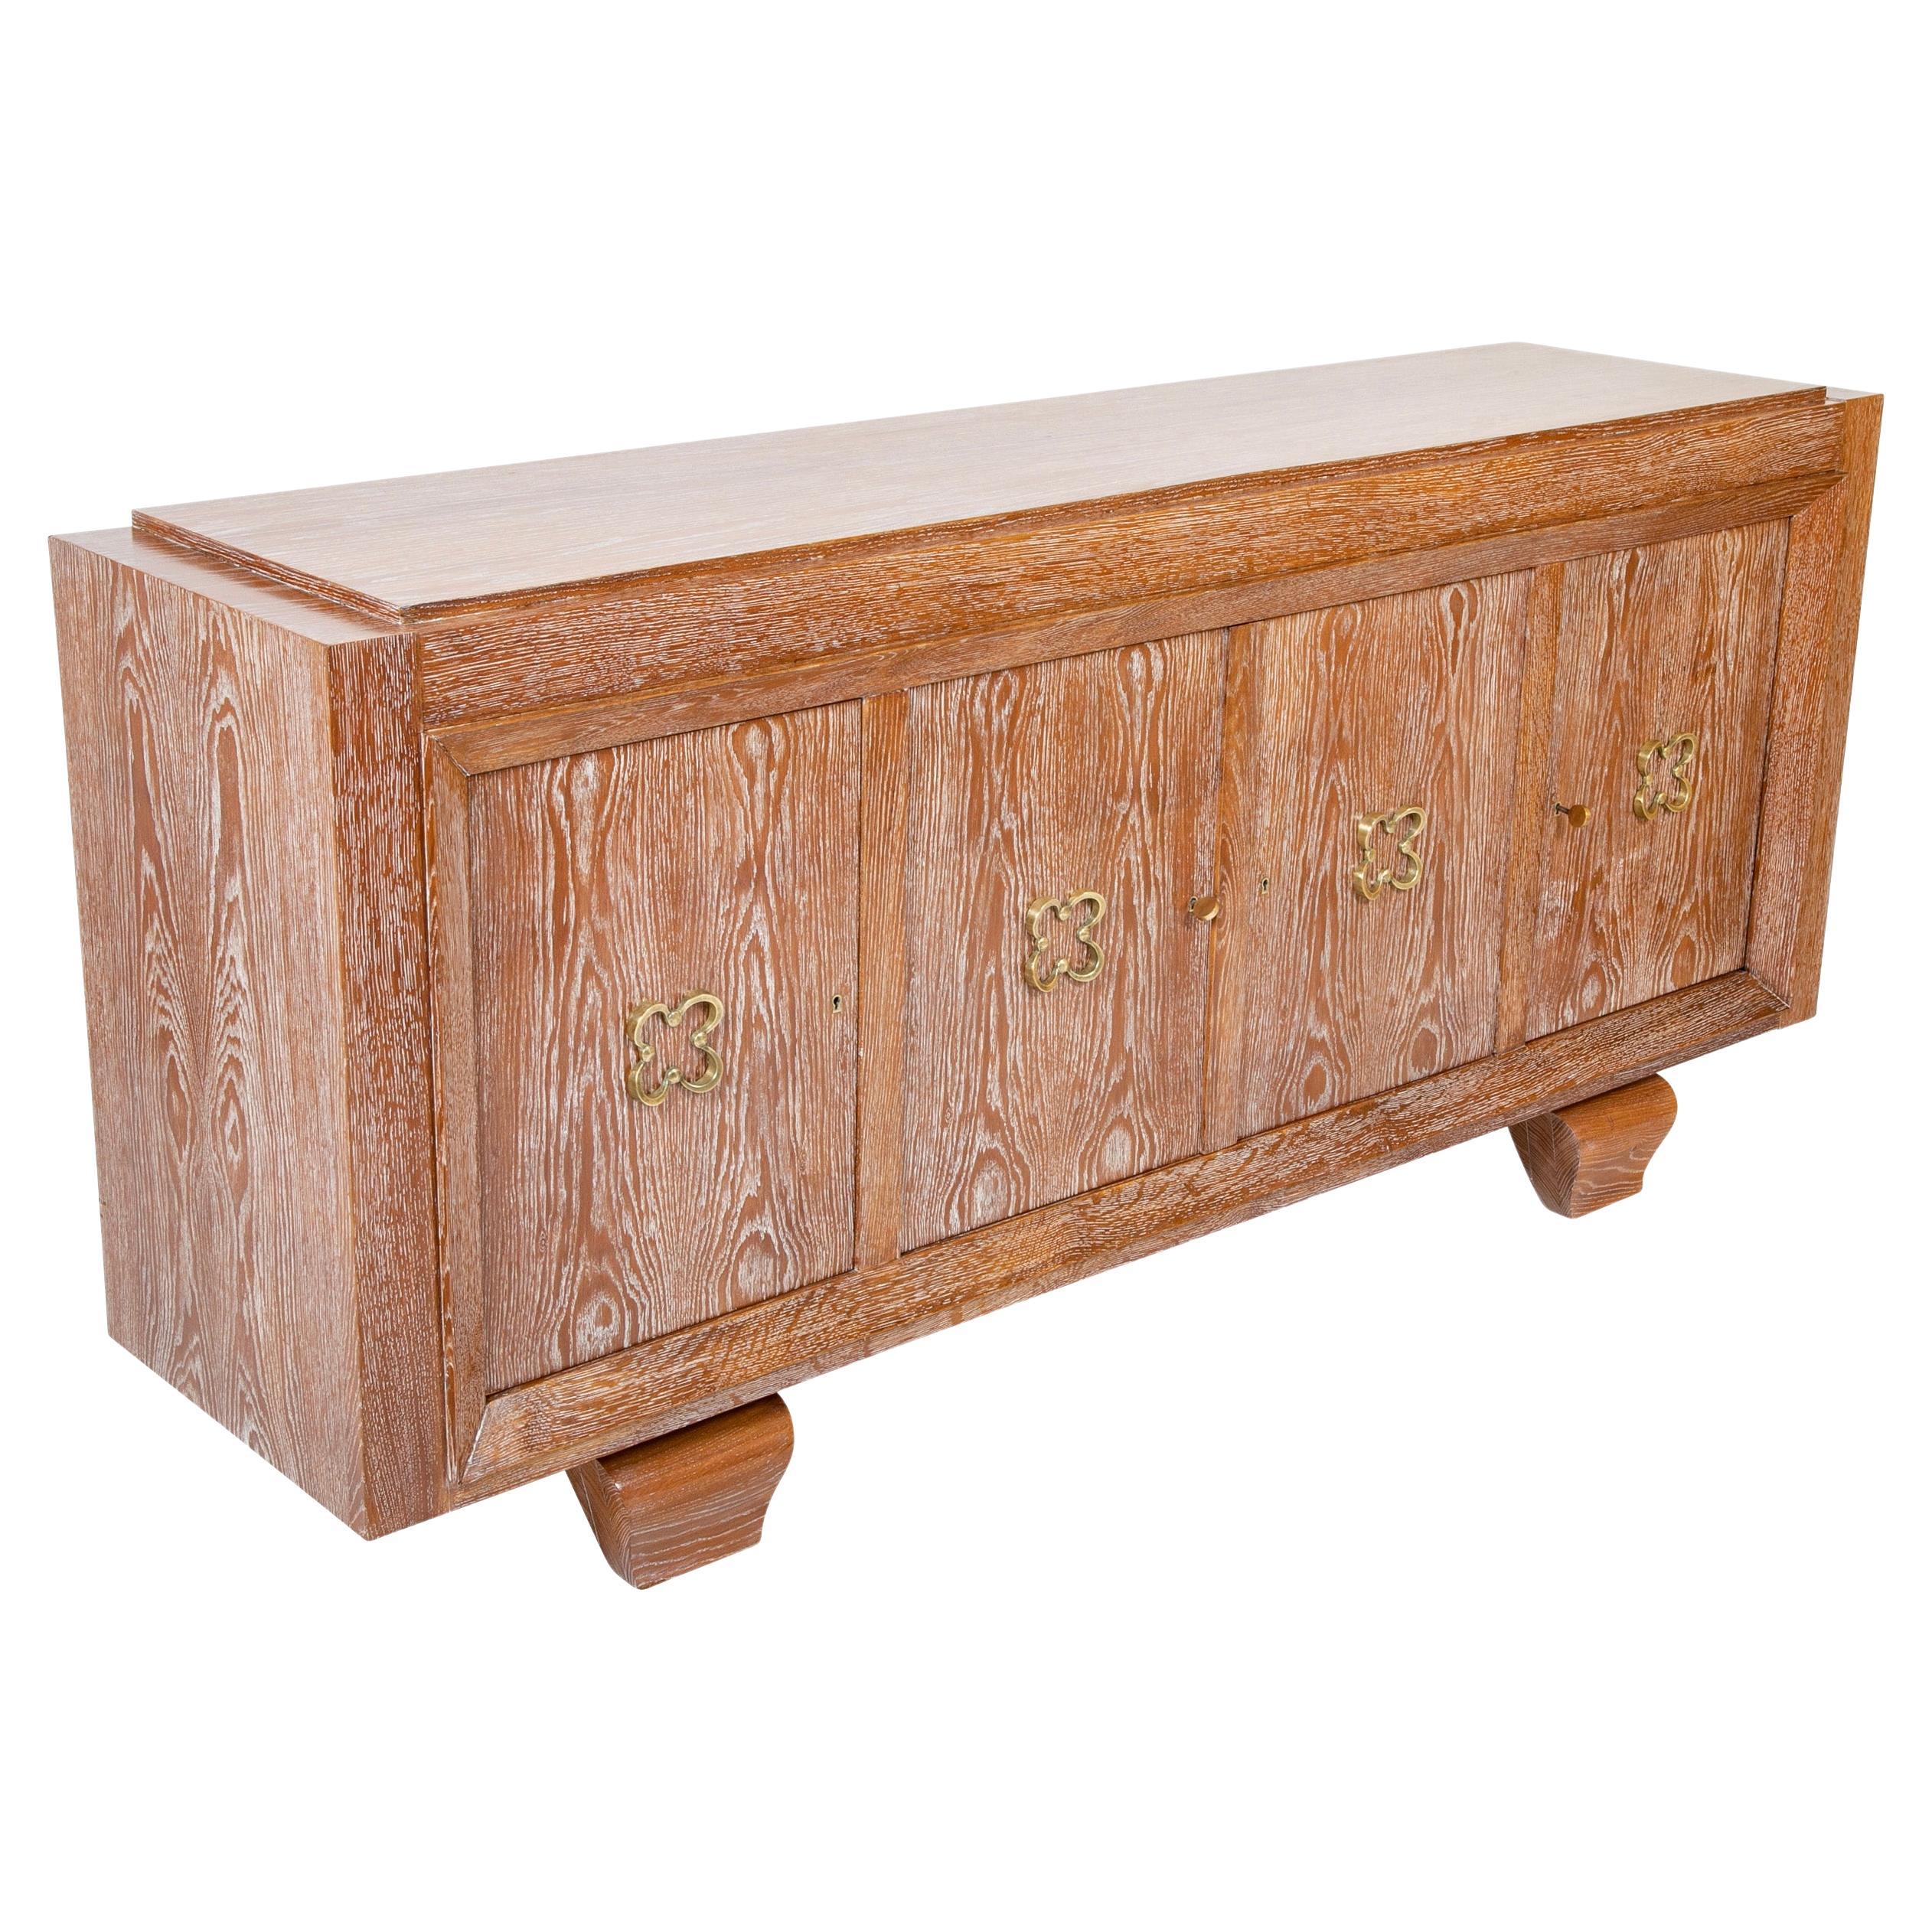 A Mid-Century French Cerused Oak Sideboard In The Manner of Jean Royere